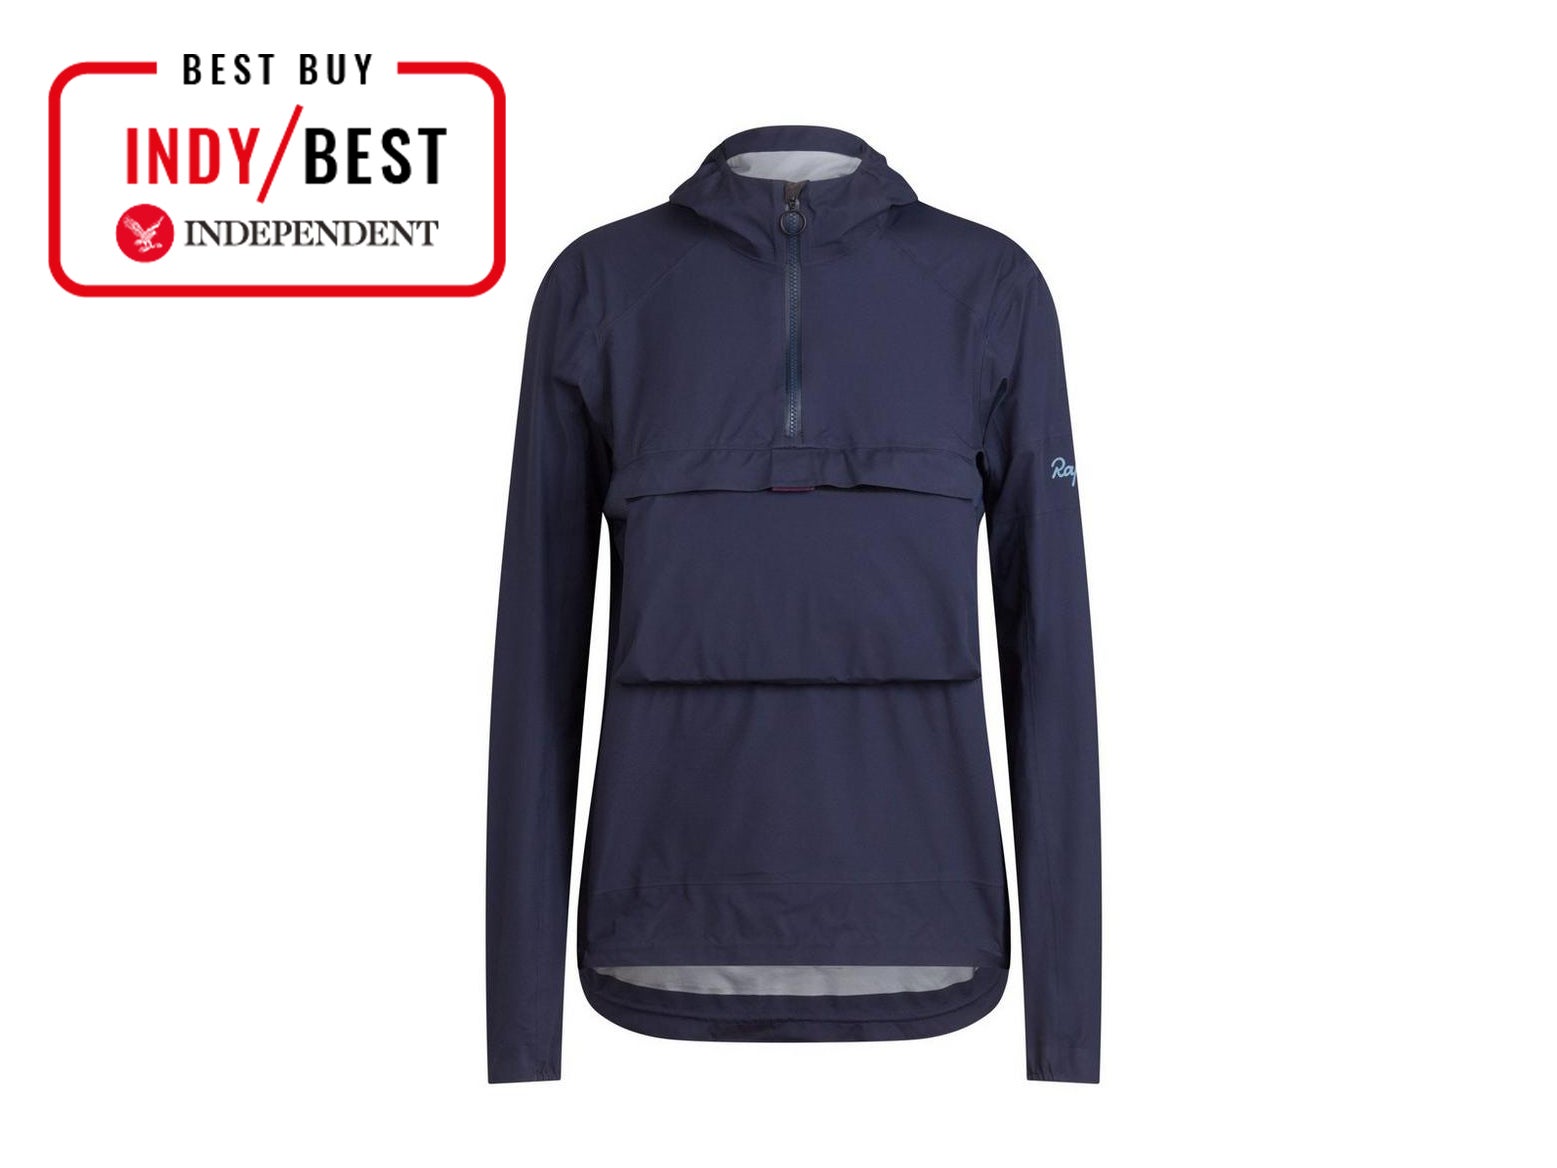 Get from A to B with a lightweight layer that will keep you warm